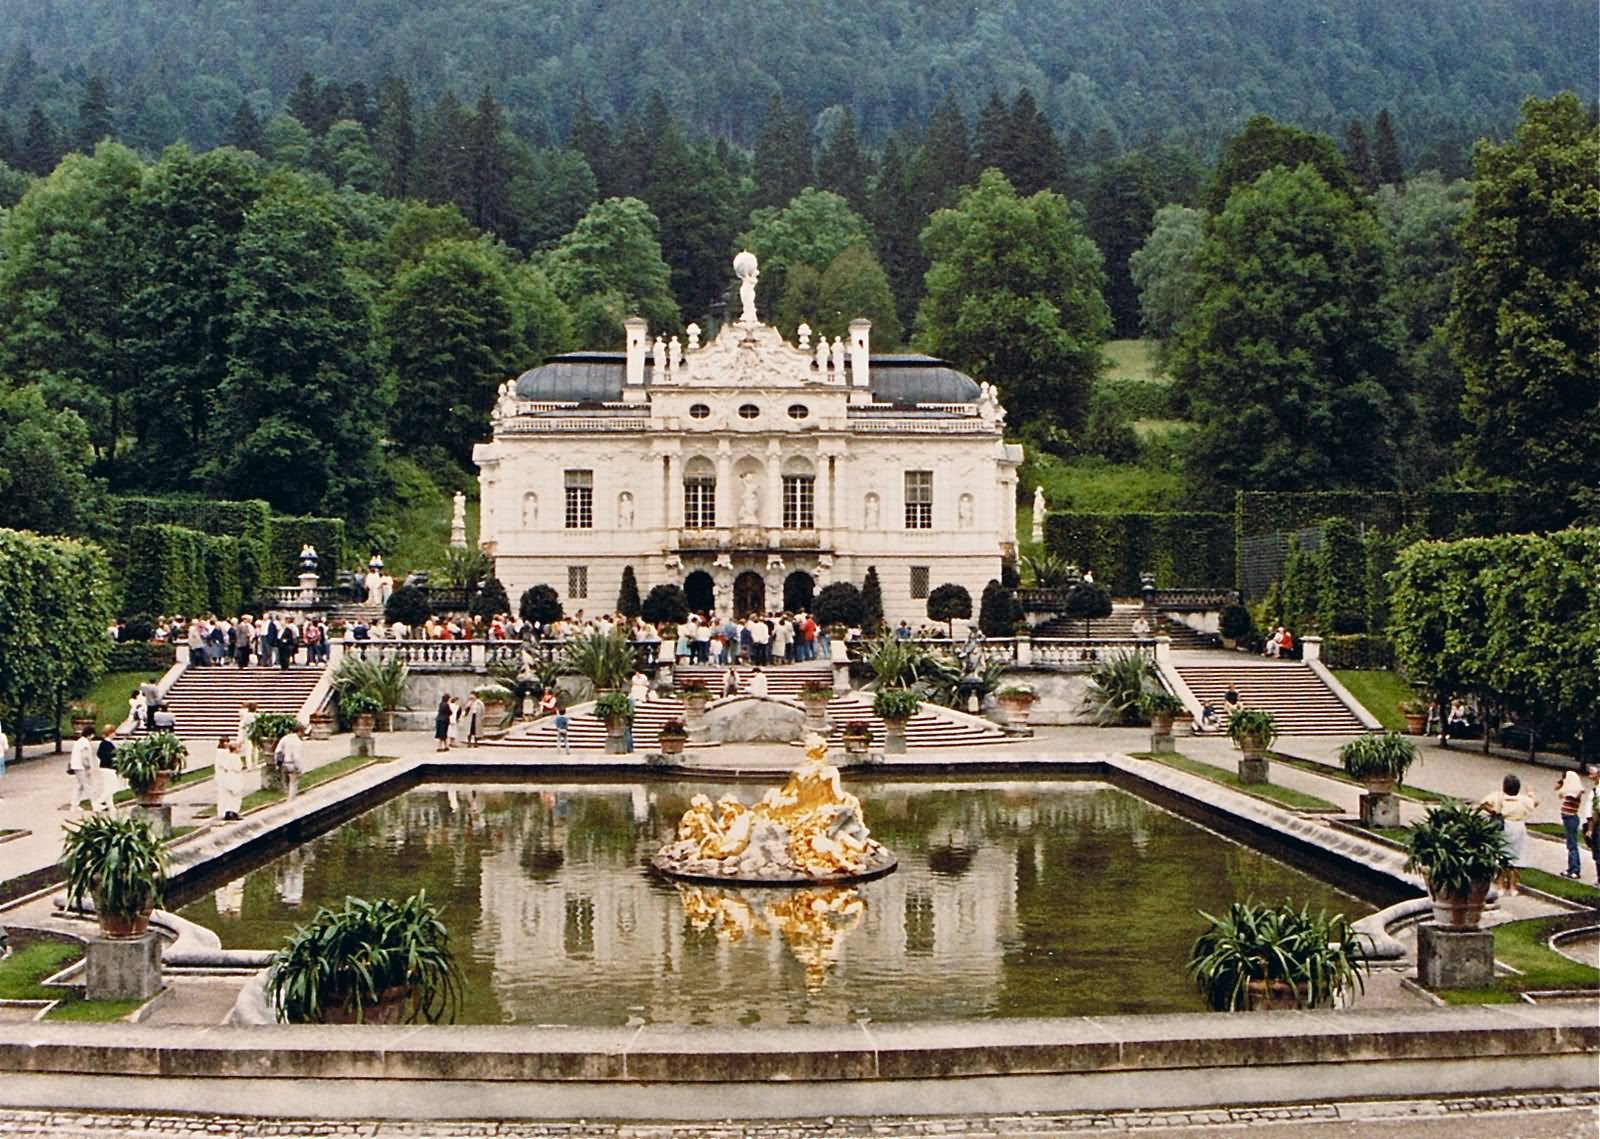 The Linderhof Palace In Bavaria, Germany